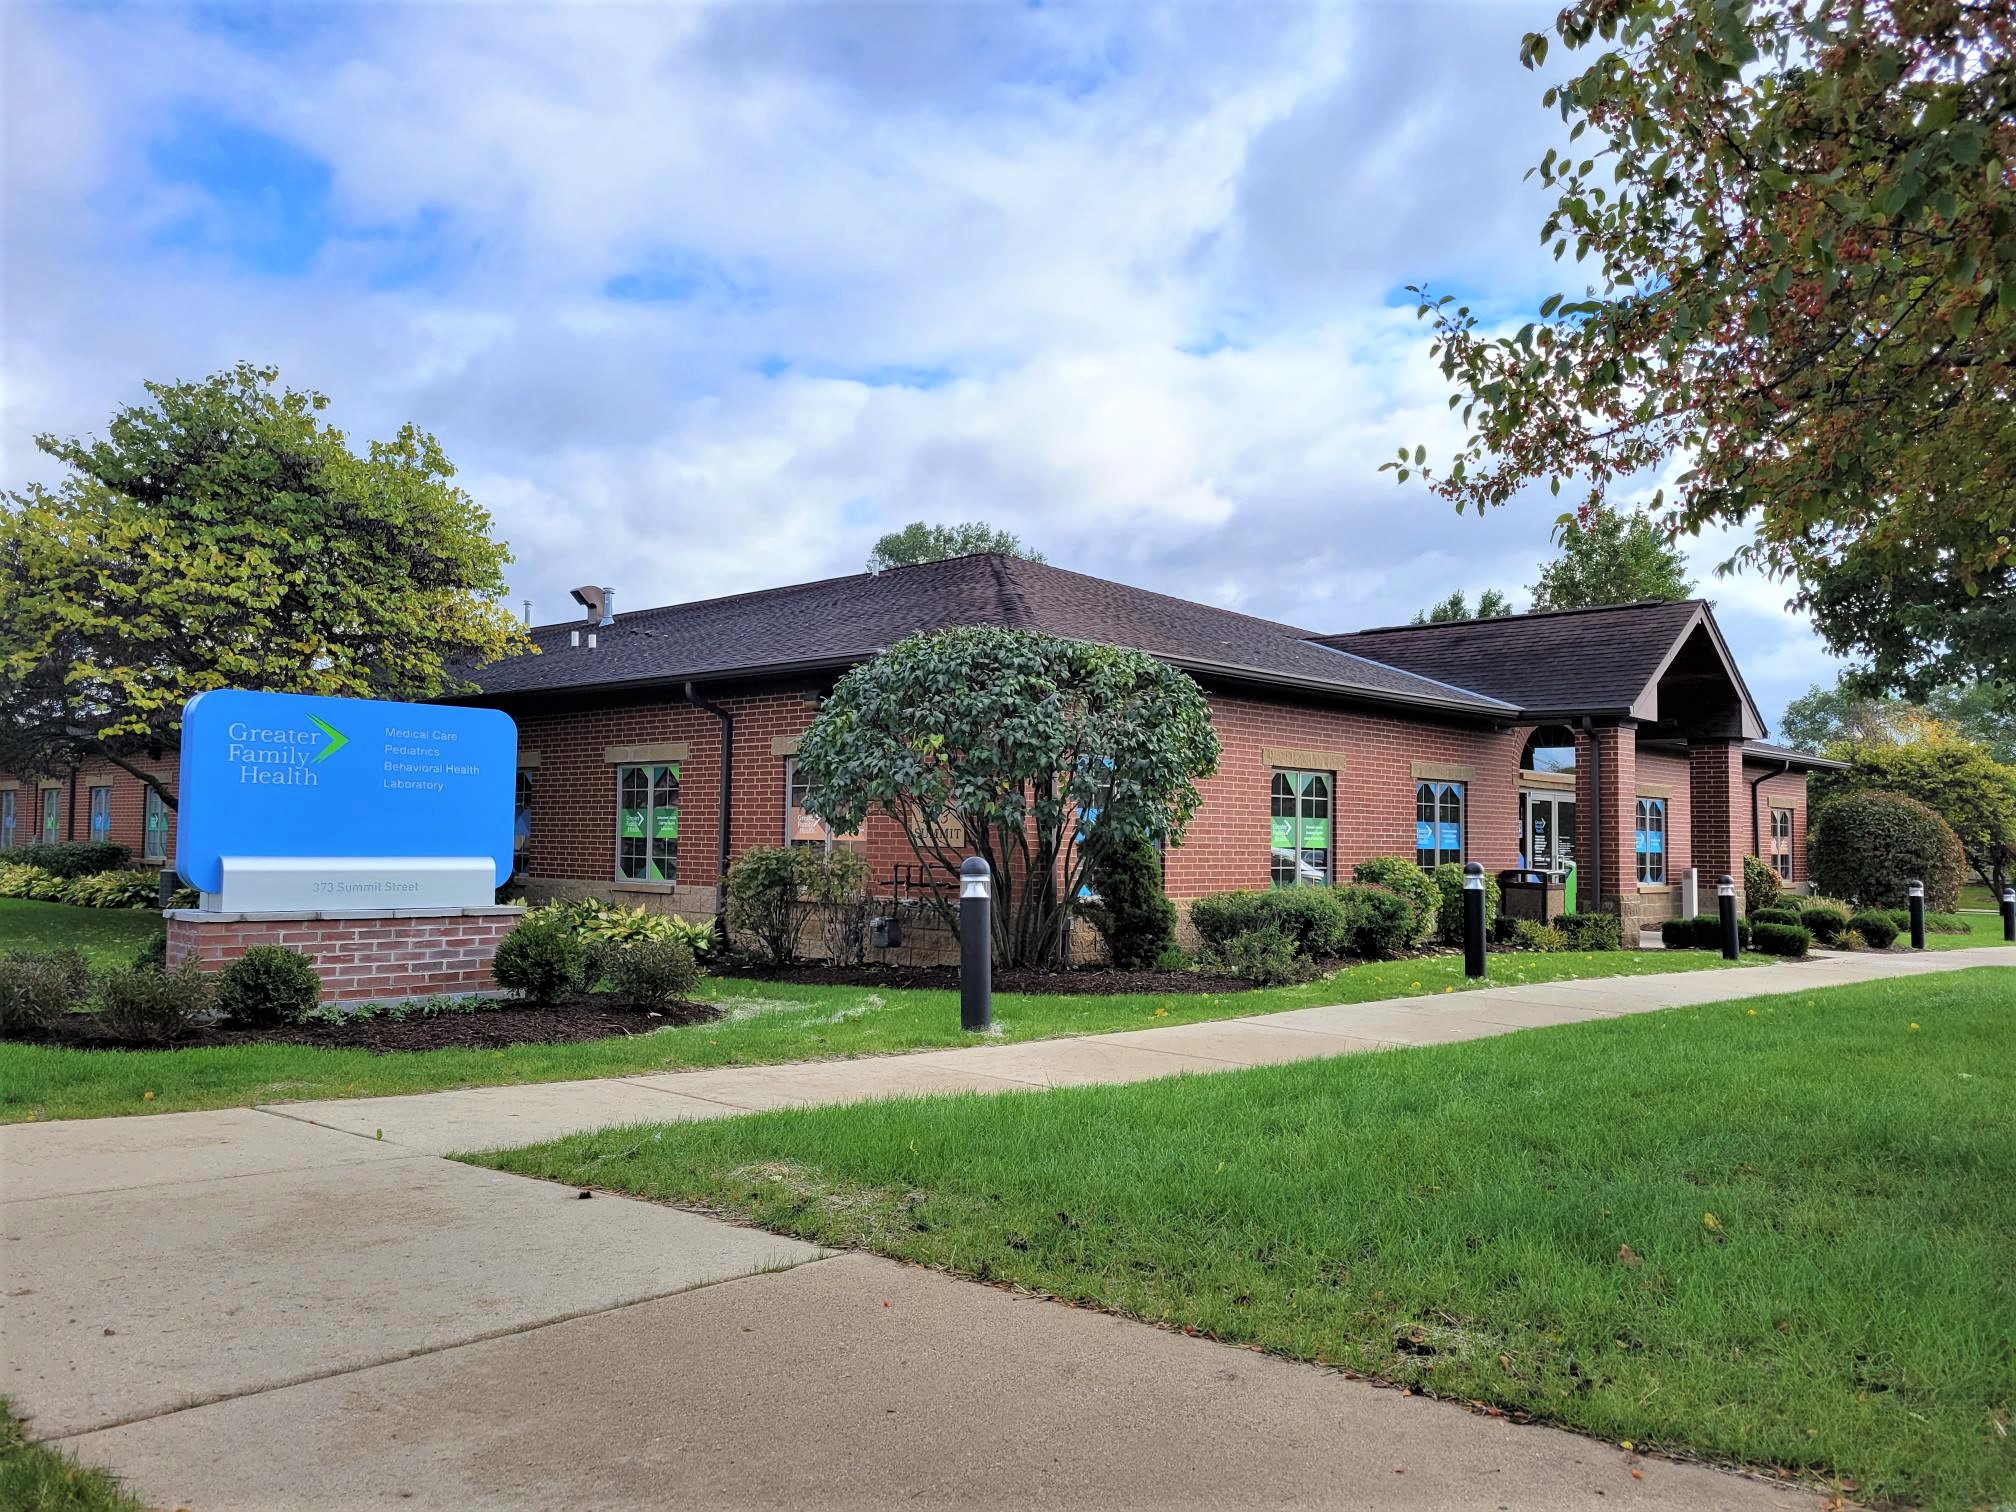 Building: 373 Summit Street - Greater Family Health